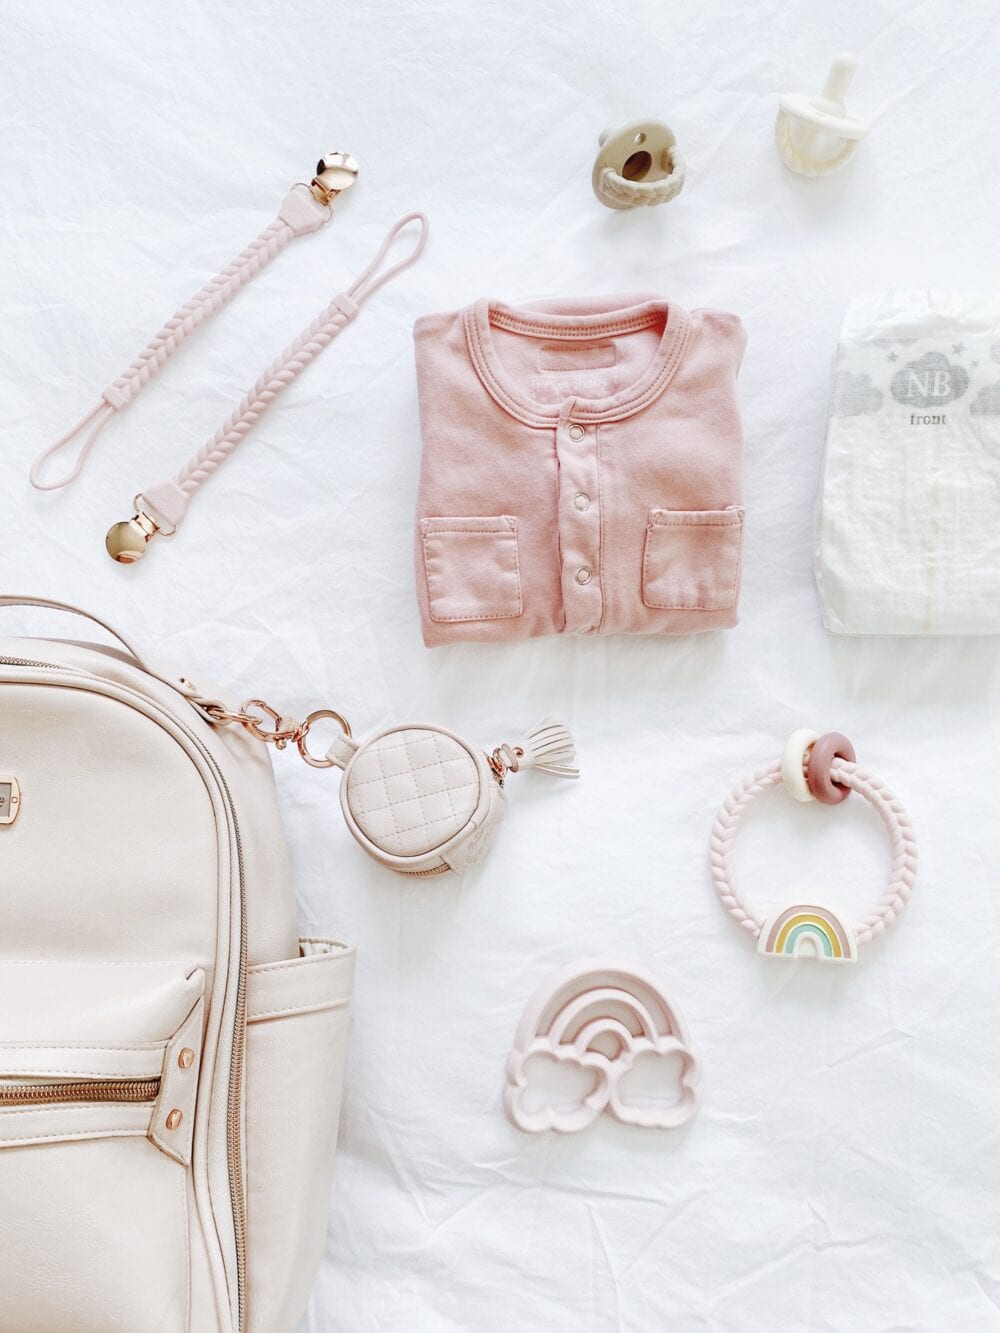 A pink baby bag and other baby items laid out on a bed.